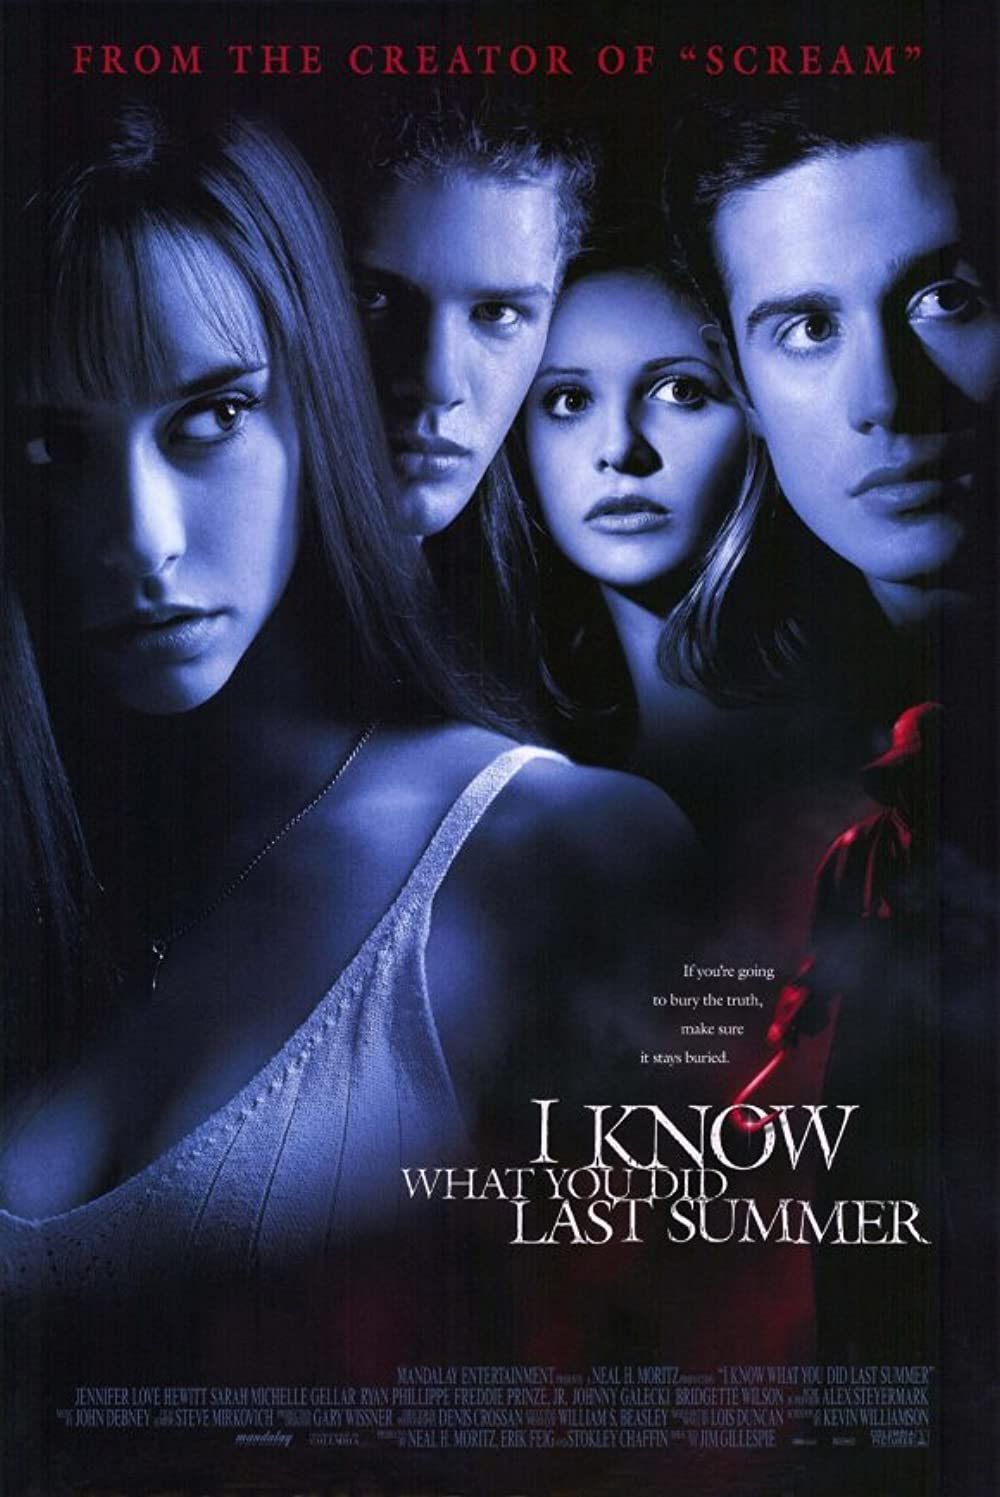 I Know What You Did Last Summer” poster